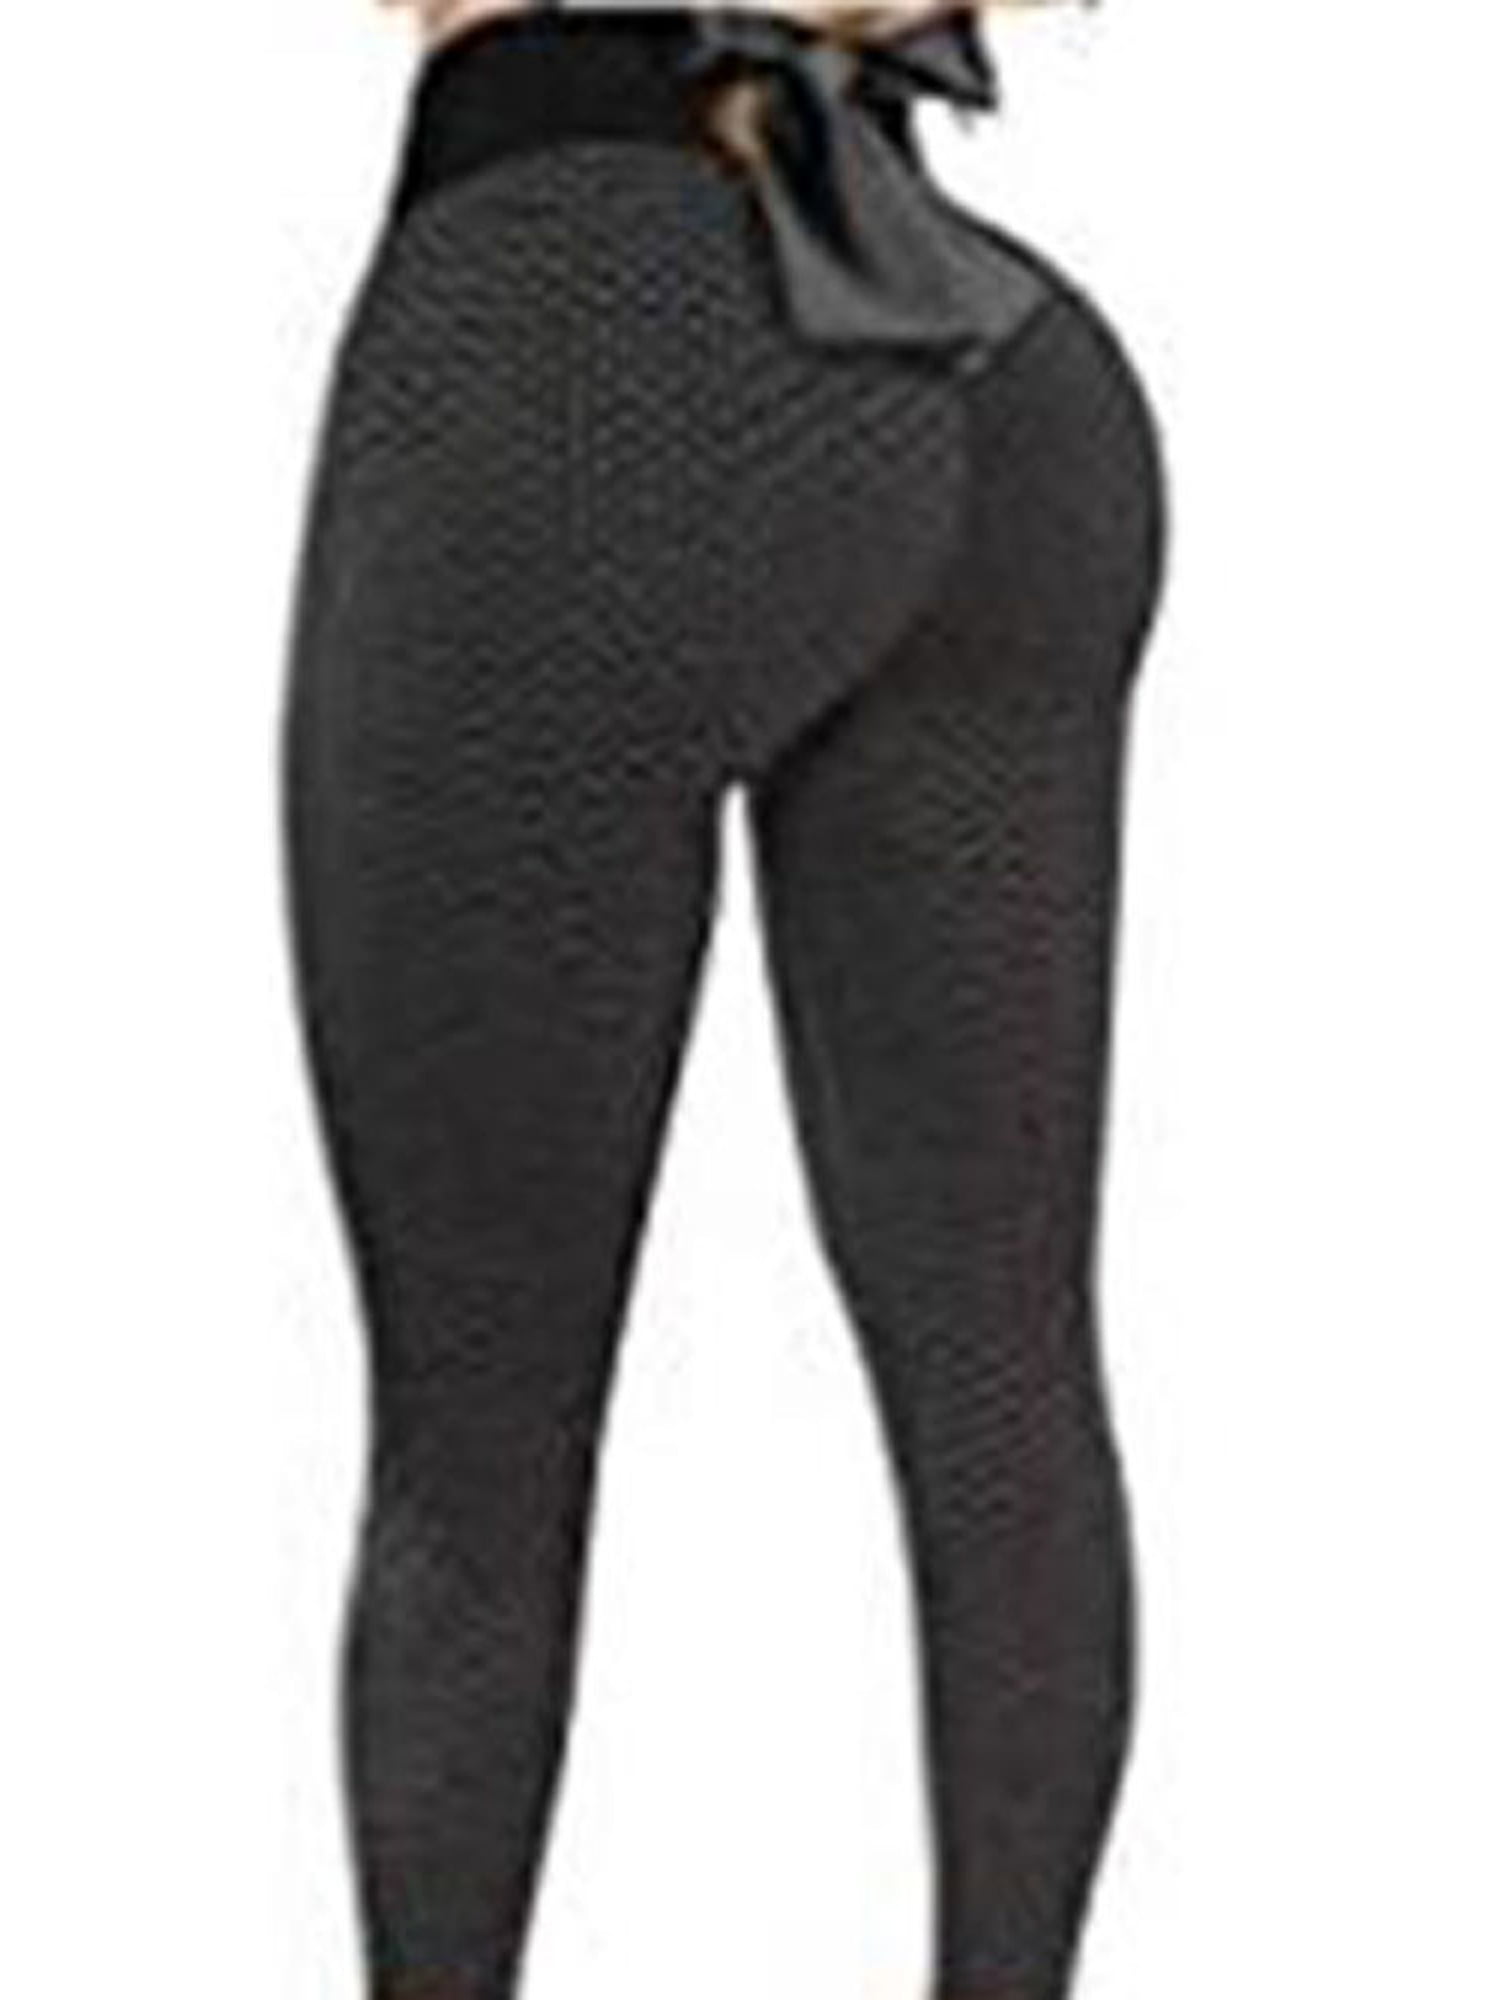 Details about   Black PU Faux Leather Skinny Pants High Waist Push Up Butt Lift Stretch Leggings 